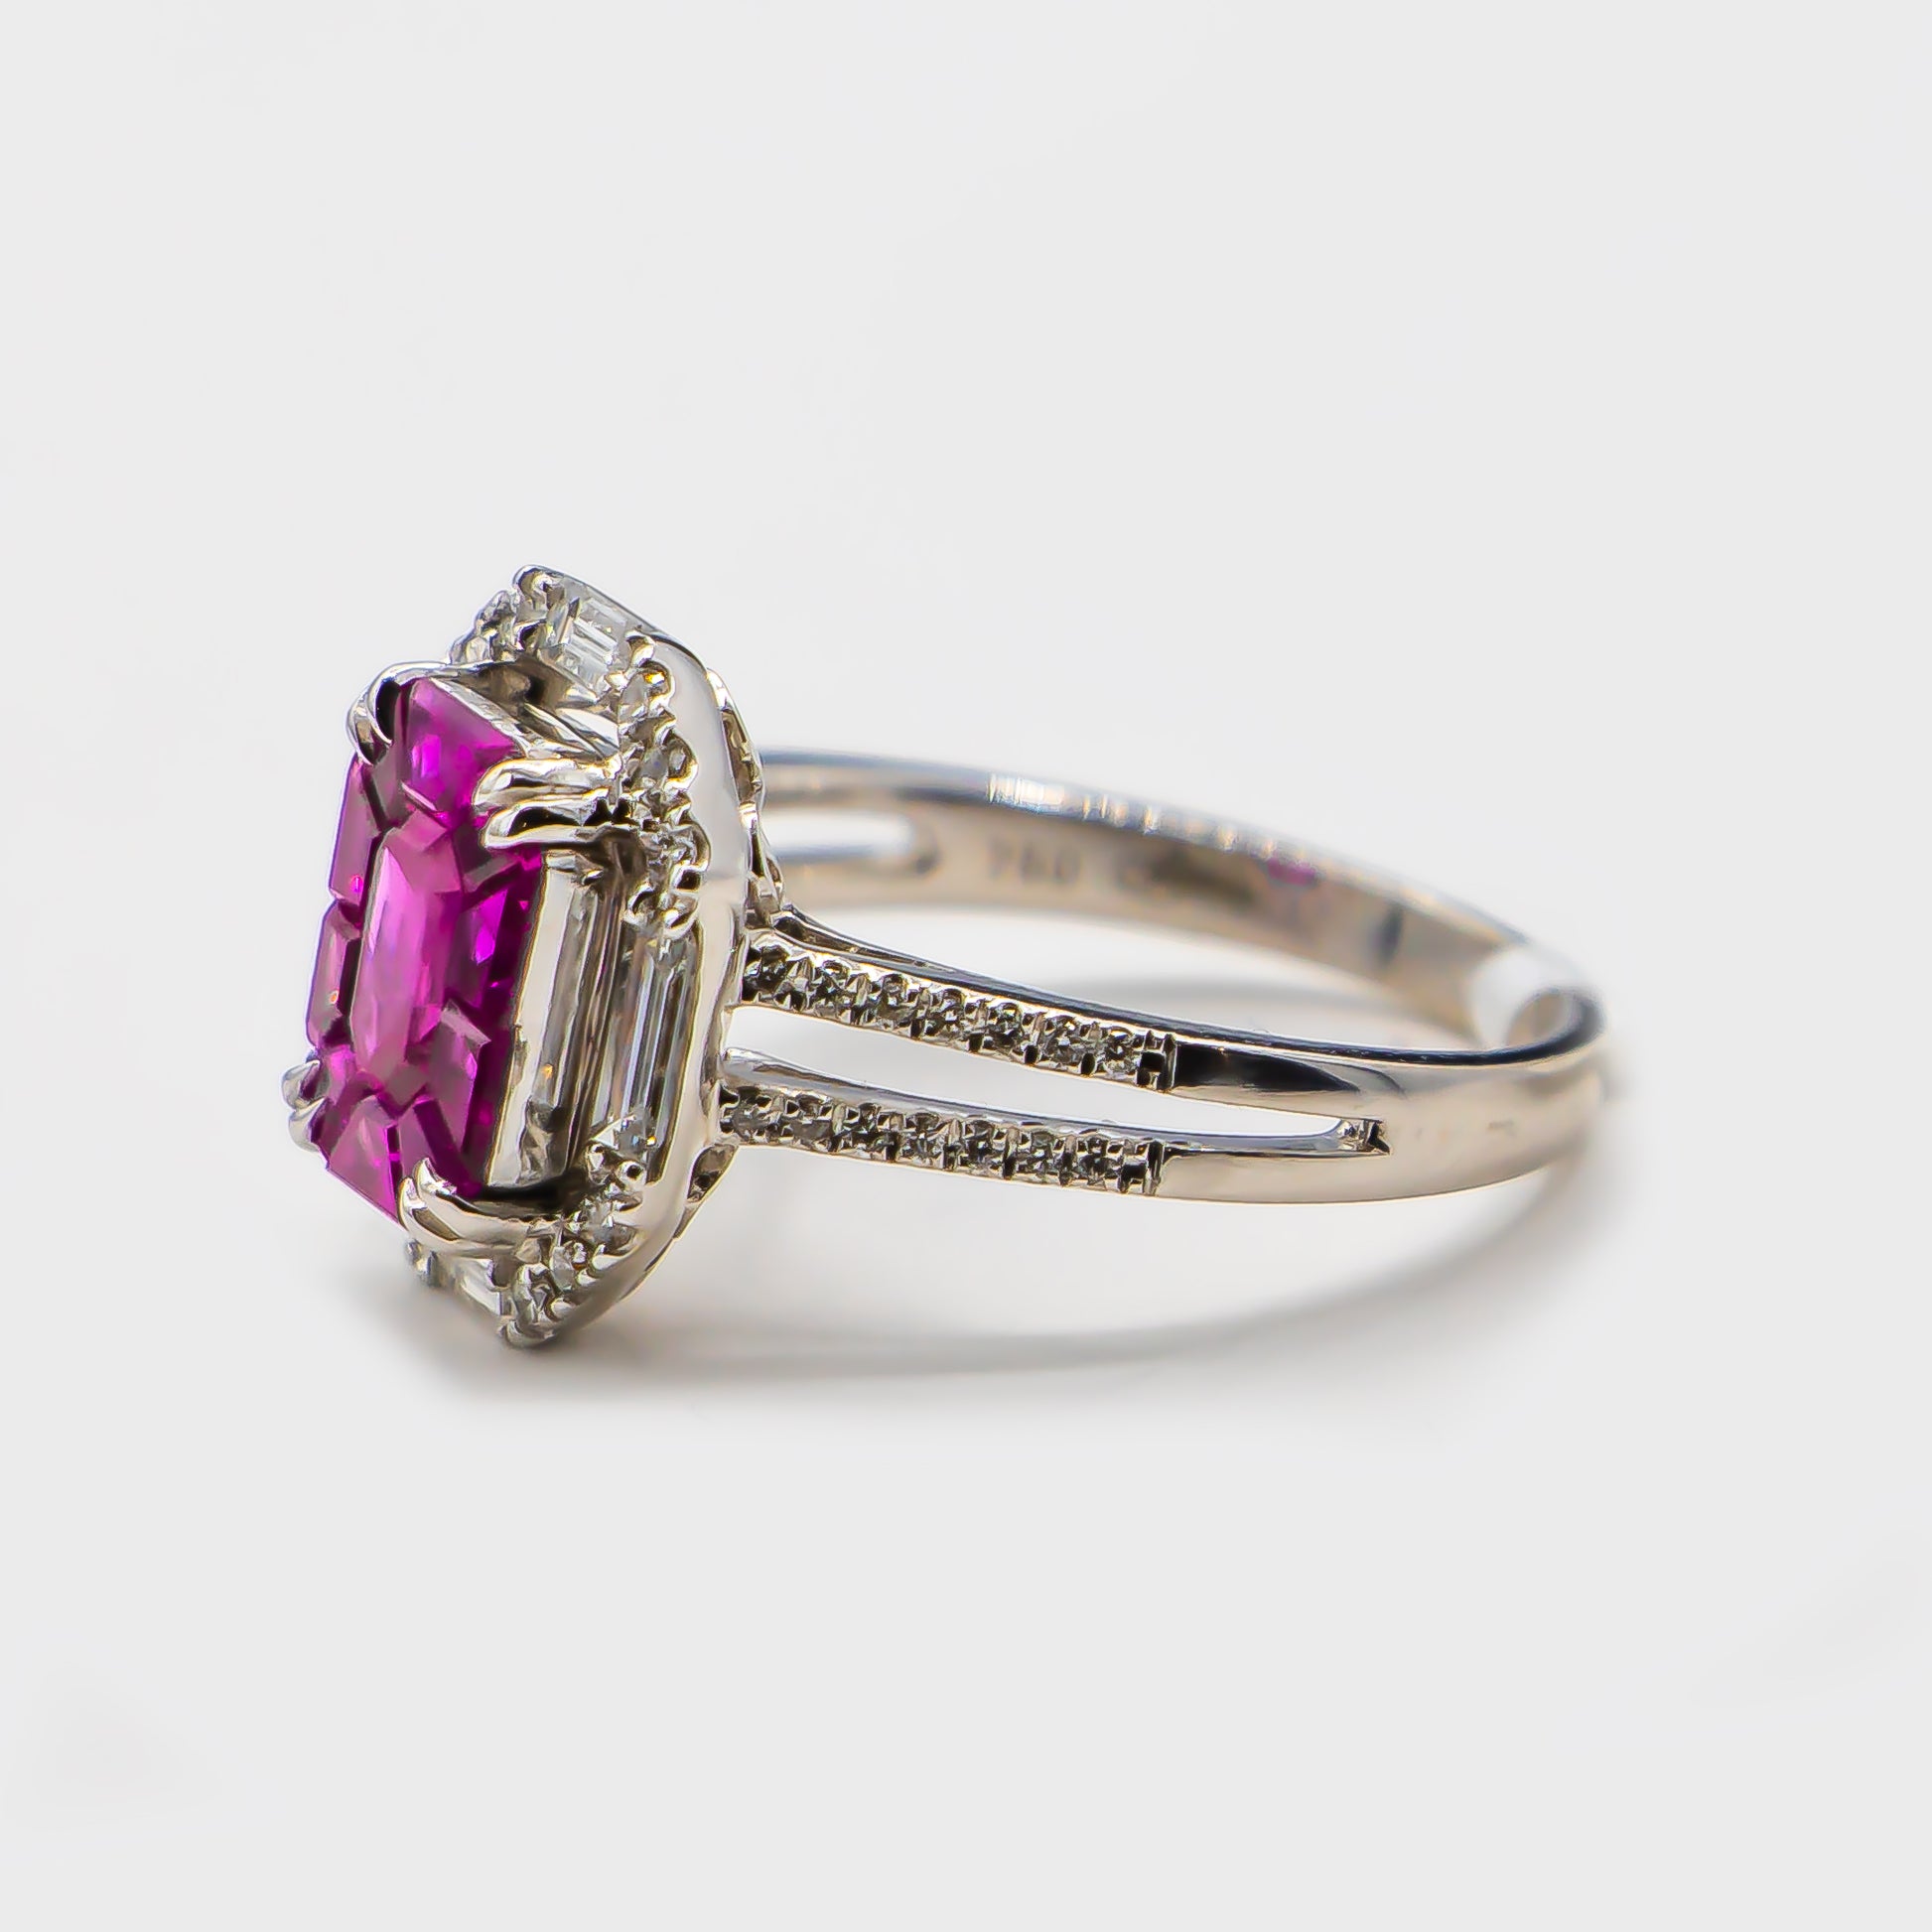 Hot Pink Sapphires 1.85 Carats Ring With Diamonds 0.98 Carats from Lux USA